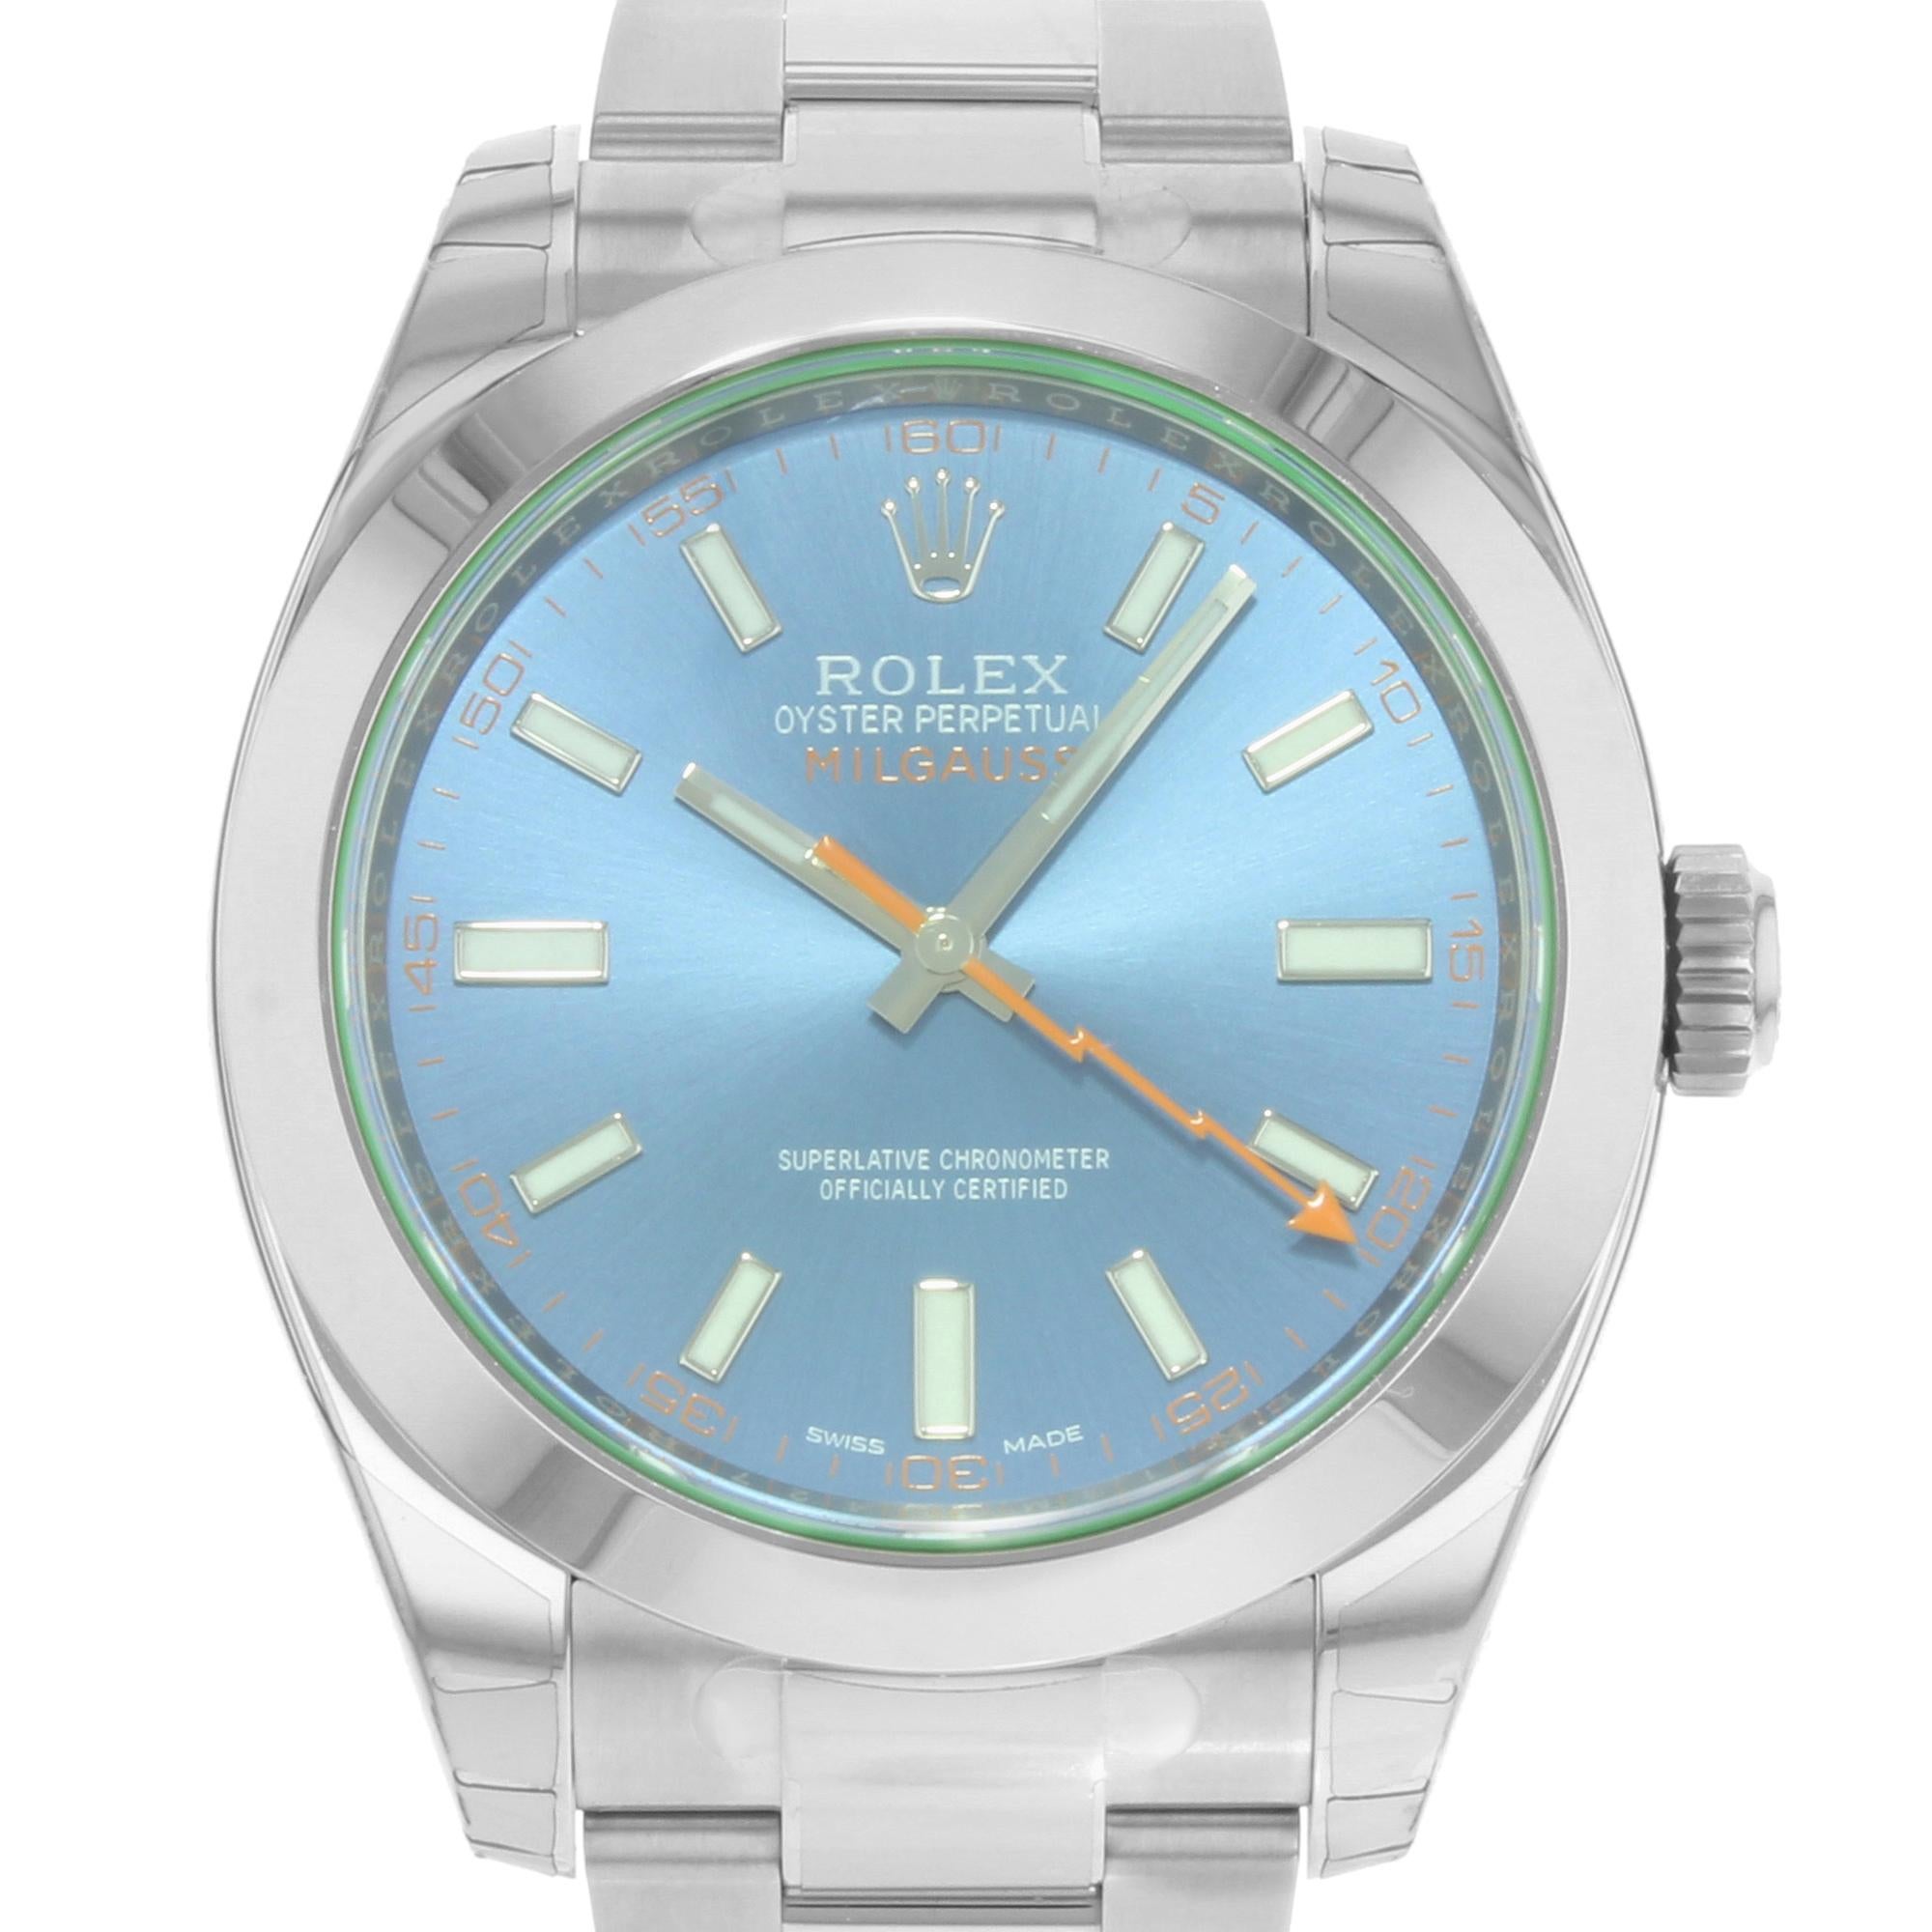 New Fully Stickers 2021 Card. Rolex Milgauss 40mm Stainless Steel Blue Dial Men's Automatic Watch 116400GV. This Timepiece is powered by an Automatic Movement and Features: Polished Stainless Steel Round Case and Steel Rolex Oyster Bracelet. Fixed